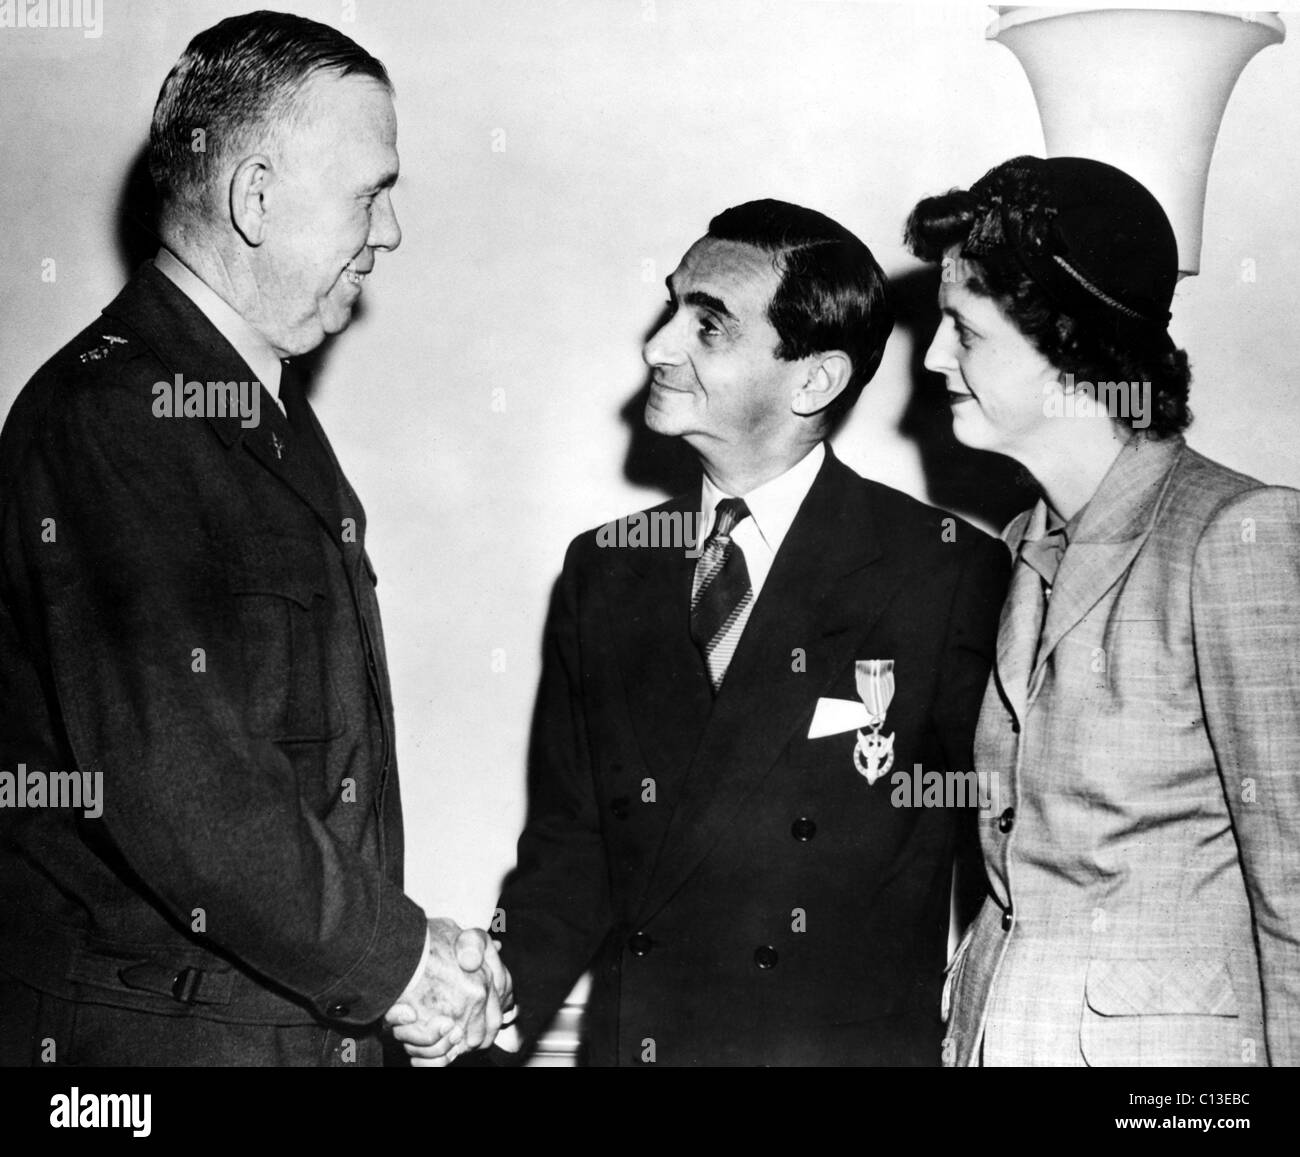 Irving Berlin is presented with the Medal For Merit by General George C. Marshall as Mrs. Berlin watches on. Pentagon, Washington, D.C., 10-01-1945. Stock Photo